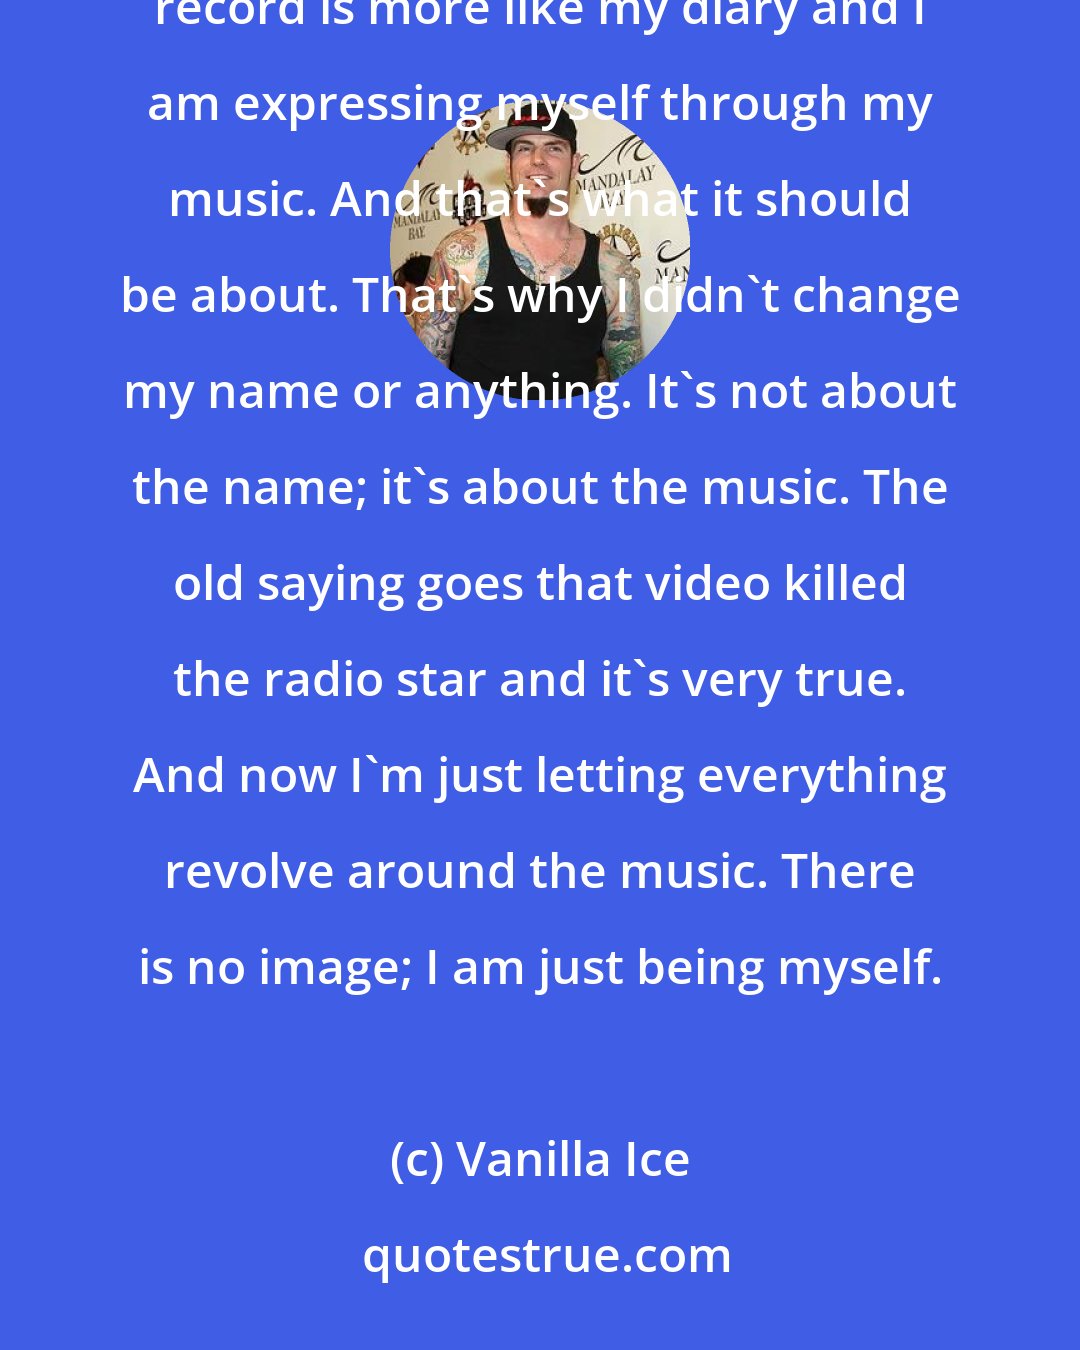 Vanilla Ice: You can't please everybody, and basically I just decided to please myself first on this record. This record is more like my diary and I am expressing myself through my music. And that's what it should be about. That's why I didn't change my name or anything. It's not about the name; it's about the music. The old saying goes that video killed the radio star and it's very true. And now I'm just letting everything revolve around the music. There is no image; I am just being myself.